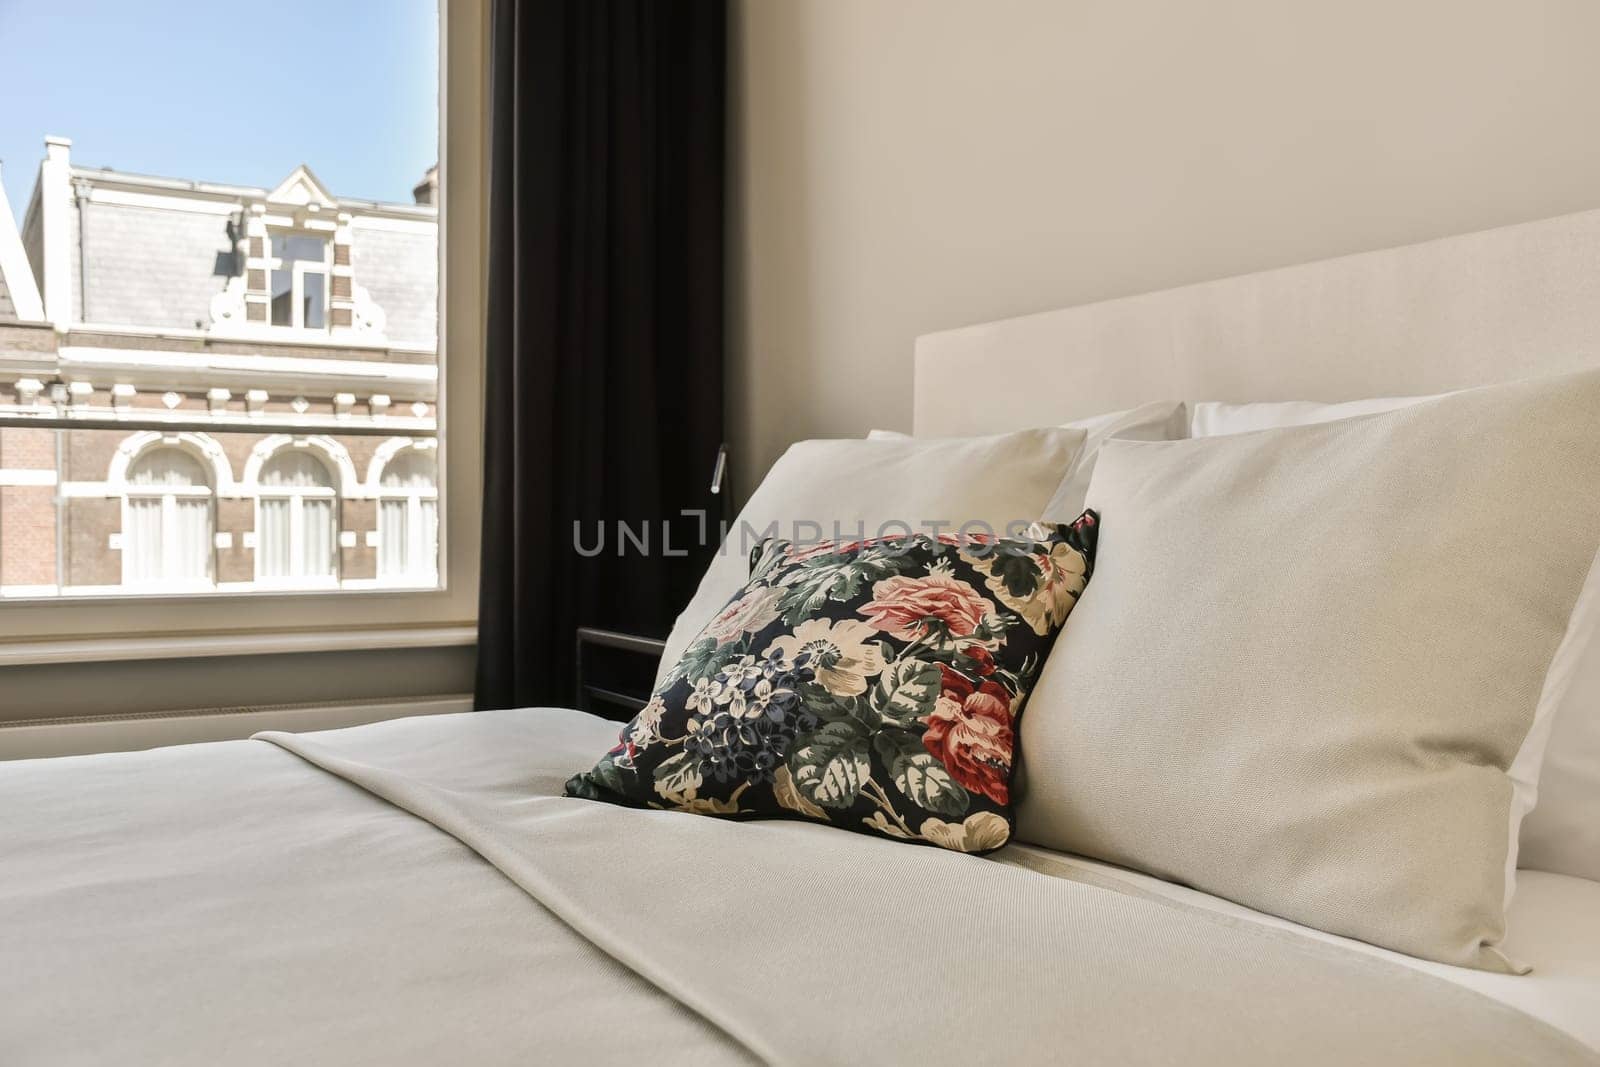 a bed with white sheets and pillows in front of a large window looking out onto the cityscapea